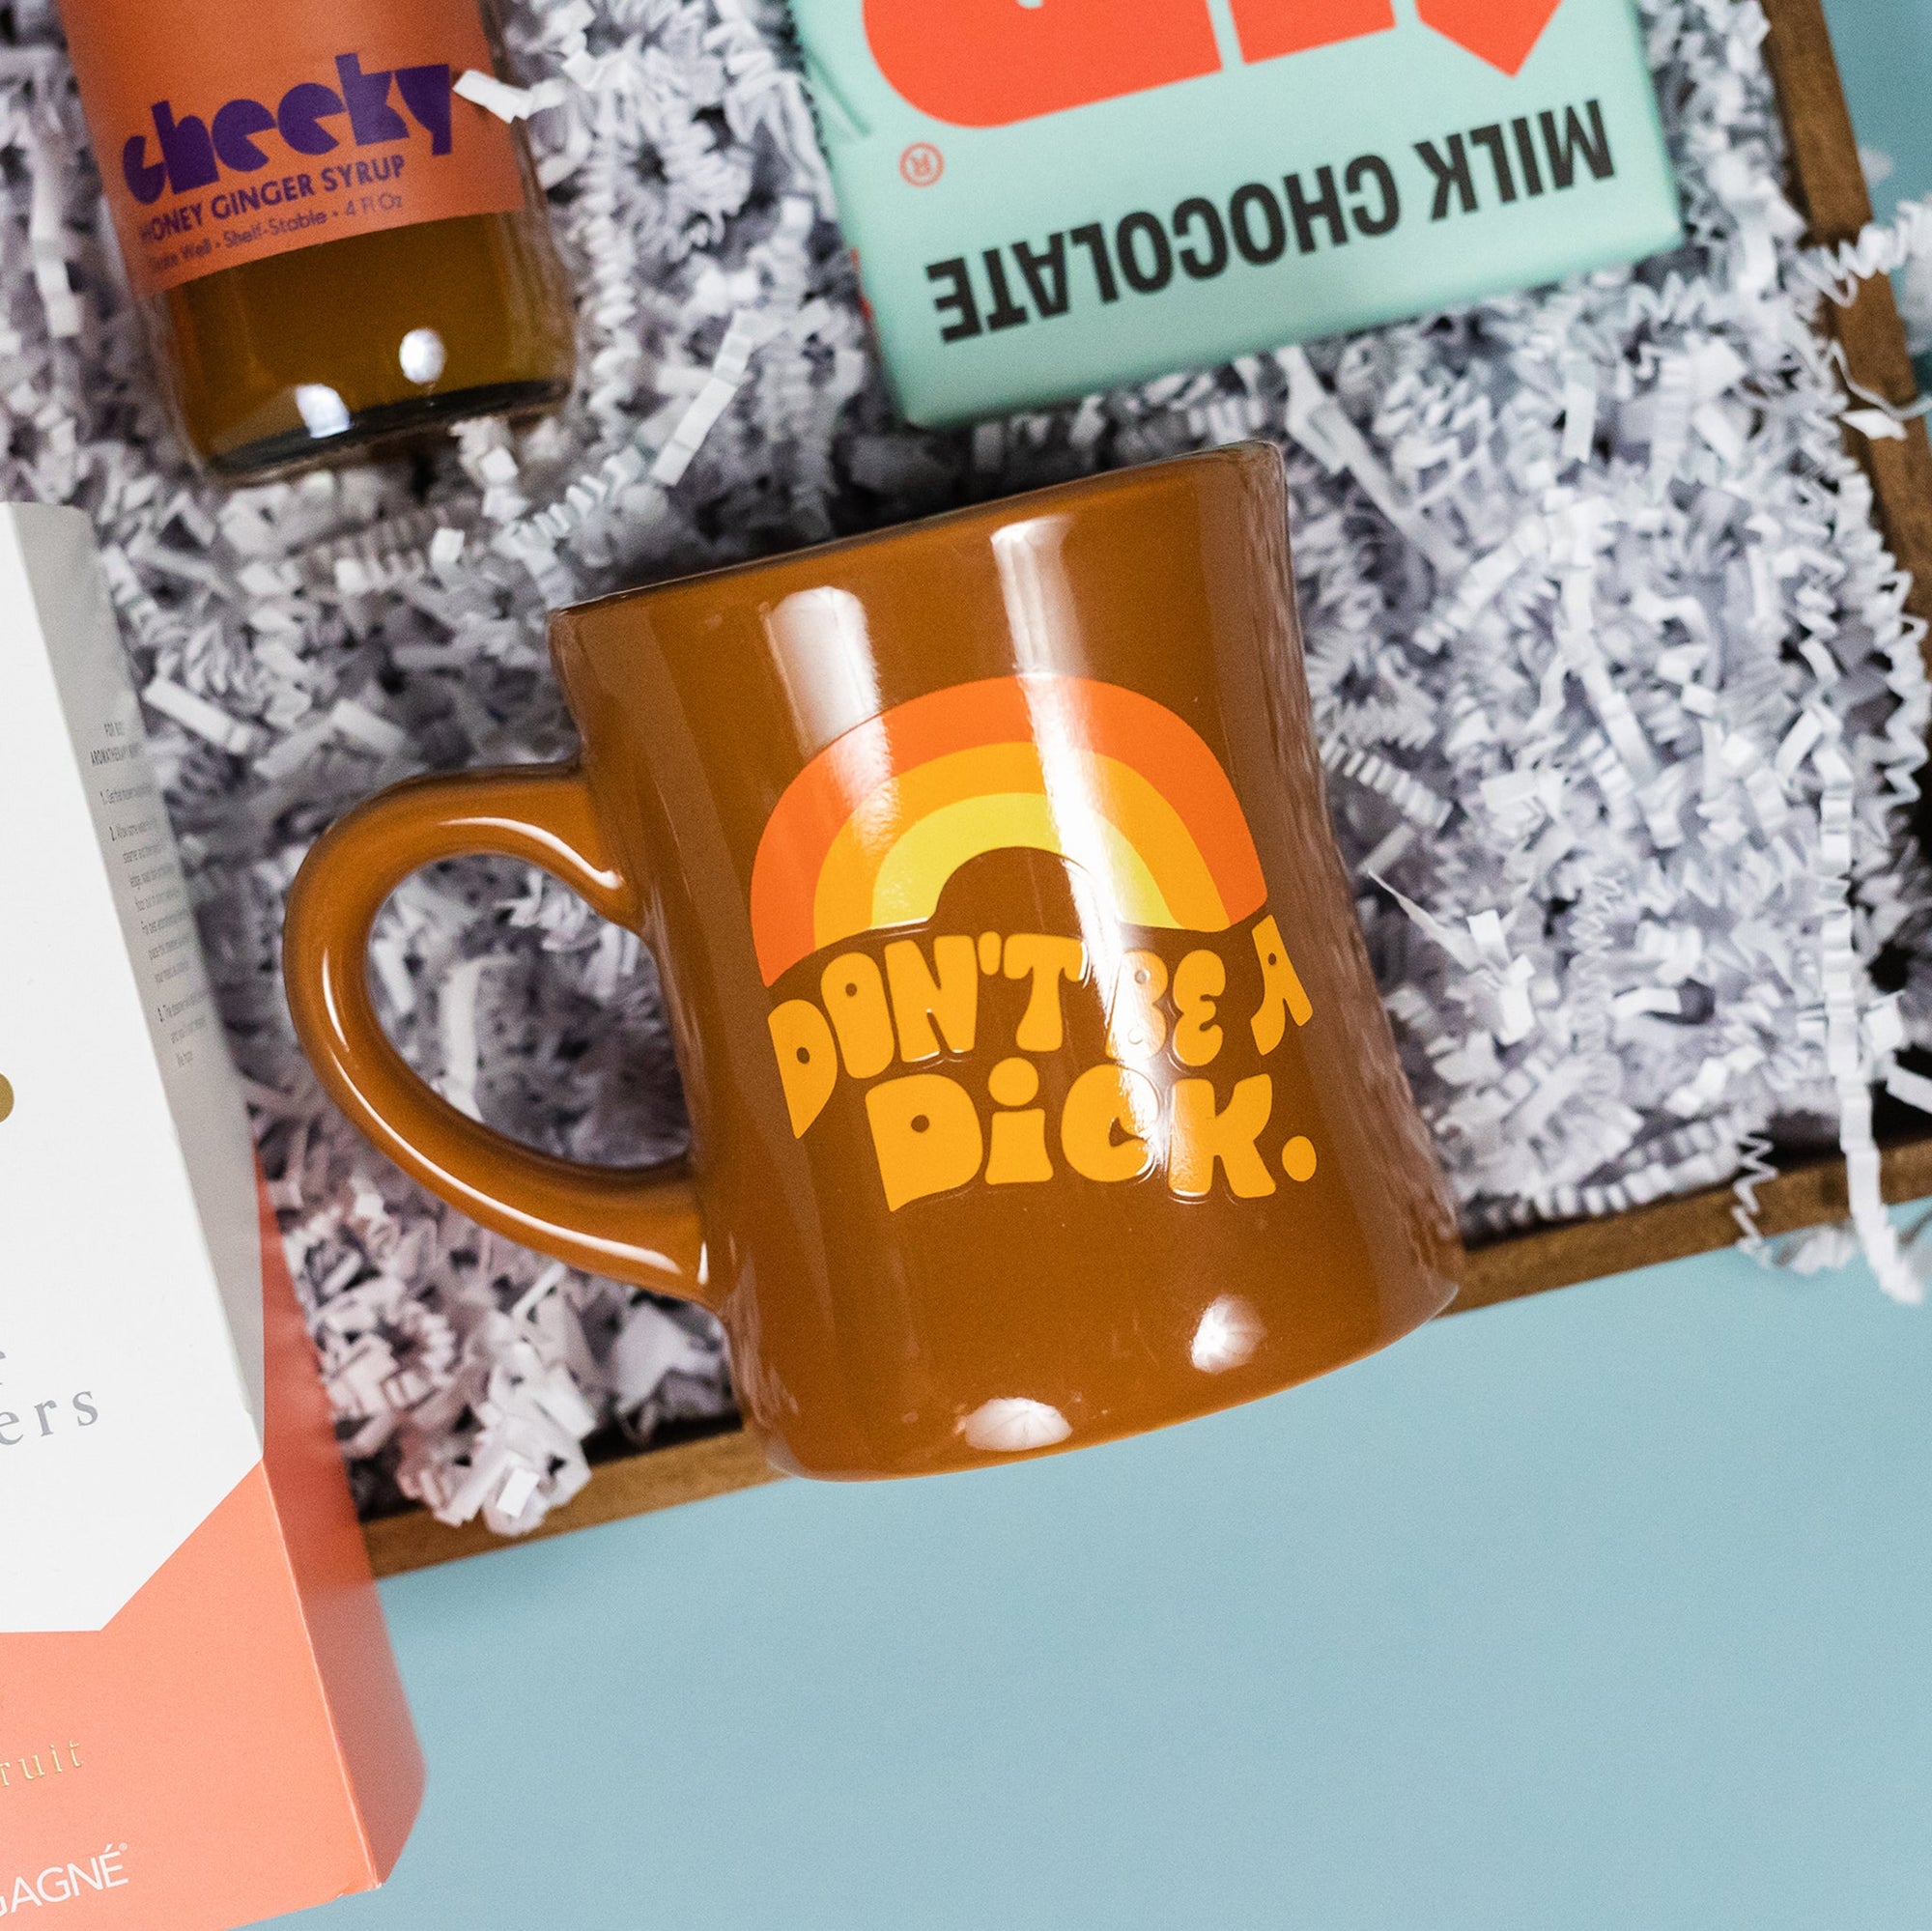 On a calming blue background with green wobbly cutout shape sits a wooden tray of products and white paper krinkle. The products are all in a fun, bright orange theme. This photo is a close-up on the brown diner mug that says "Don't be a Dick" in a retro orange font with a retro orange rainbow above it.